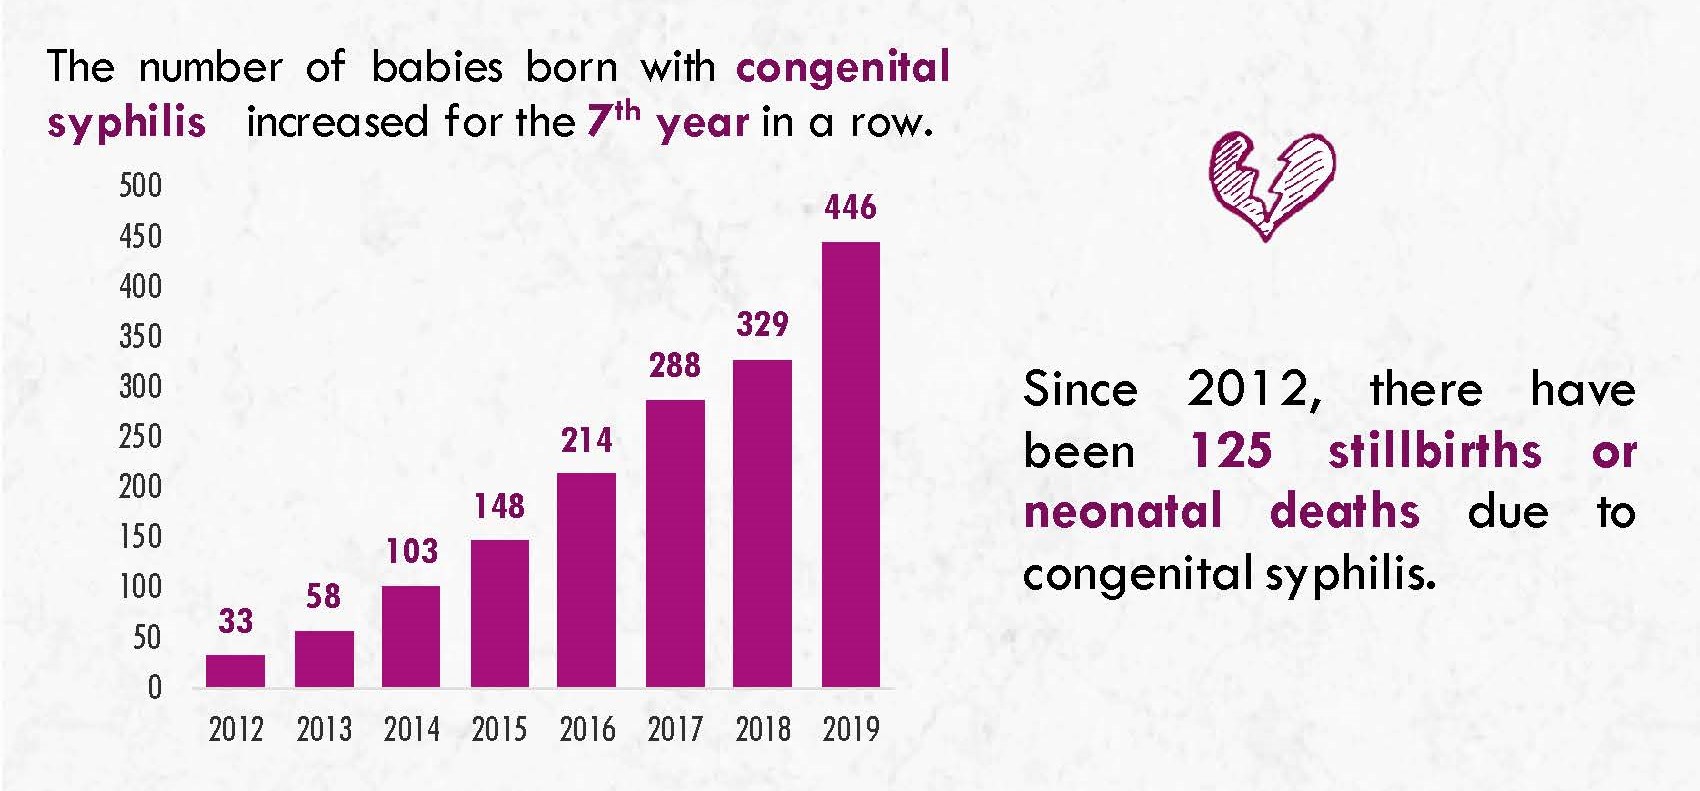 The number of infants born with congenital syphilis has grown from 33 in 2012 to 446 in 2019, including 125 stillbirths